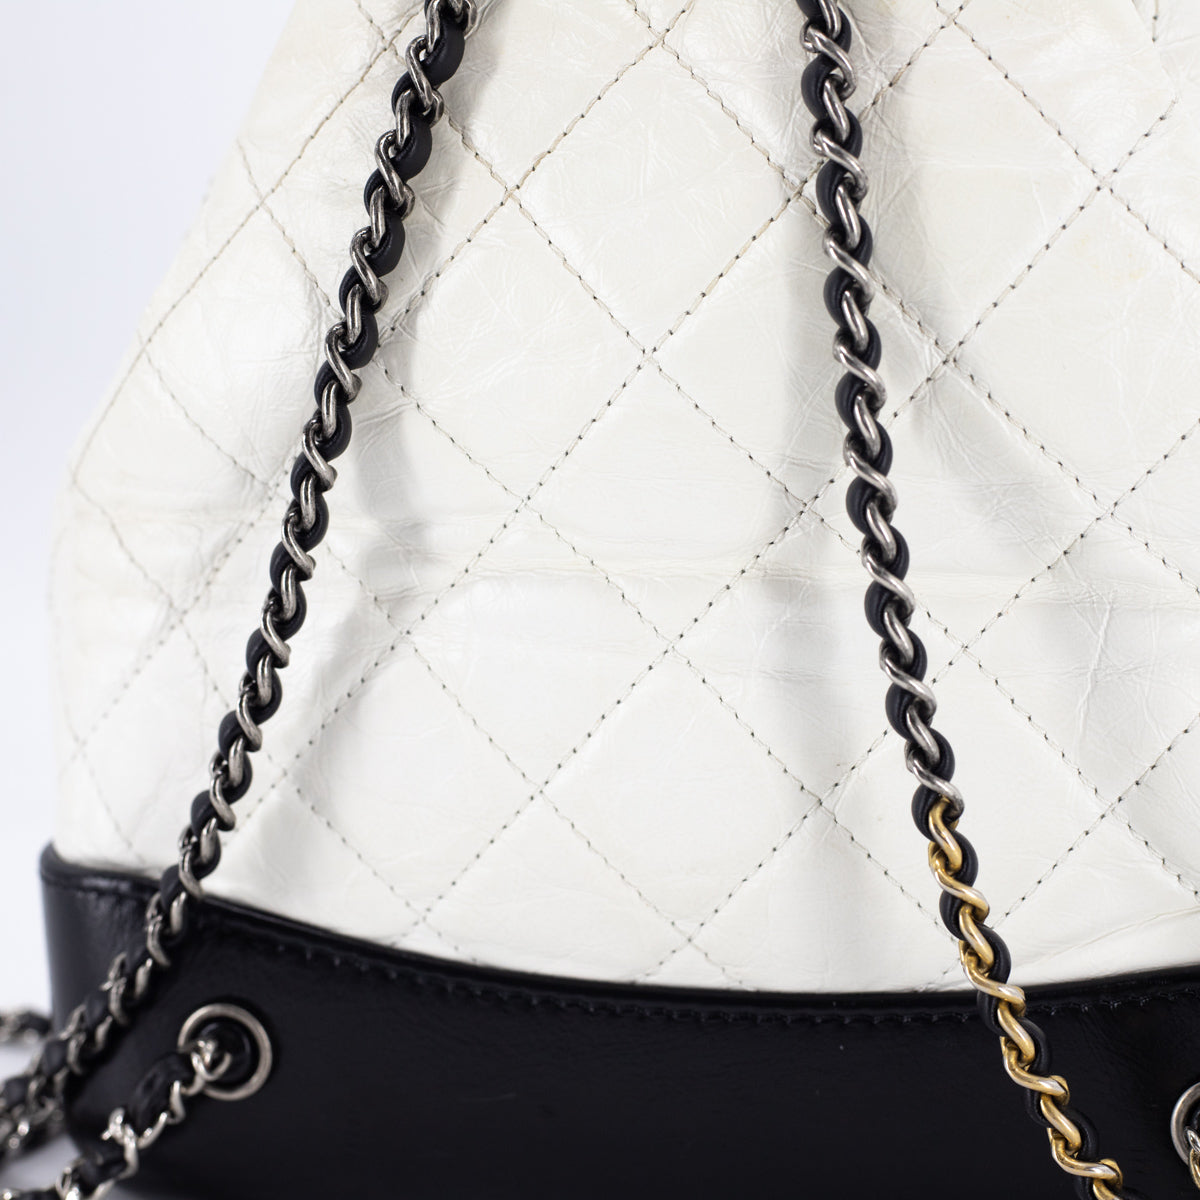 CHANEL Aged Calfskin Quilted Small Gabrielle Backpack White 790742